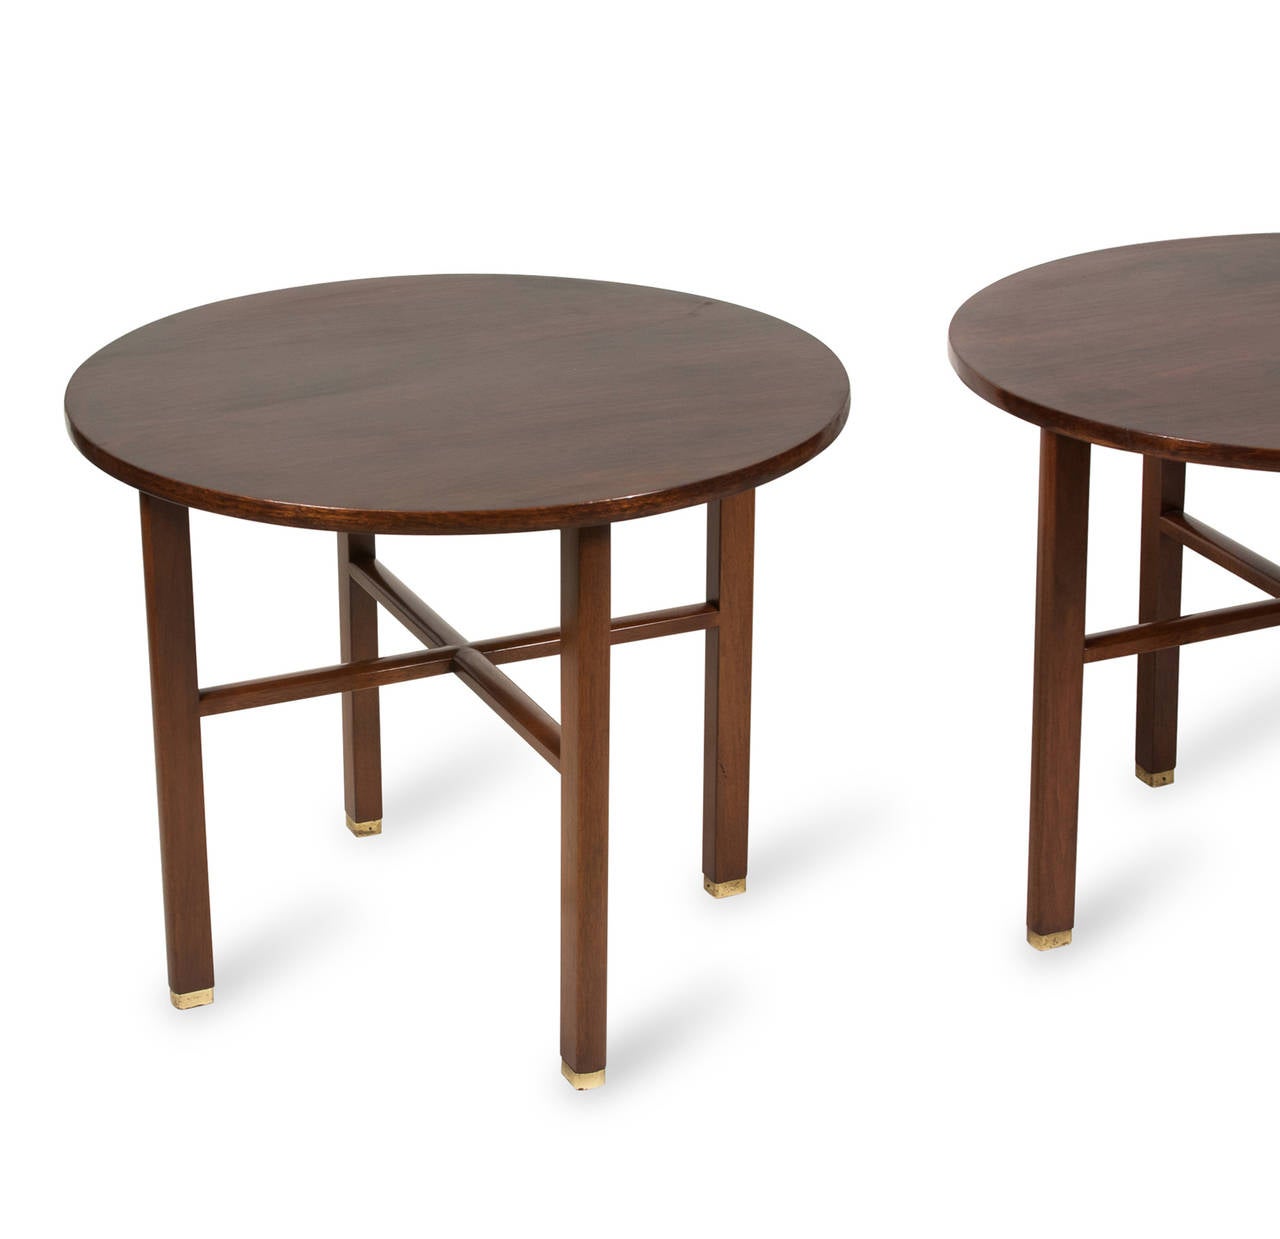 Mahogany occasional or end tables, circular top on four rectangular legs, joined by an X-stretcher, brass cap feet. By Dunbar, American 1950s. Stamped to underside. Height 22 1/2 inches, diameter 27 inches. (Item #2218)